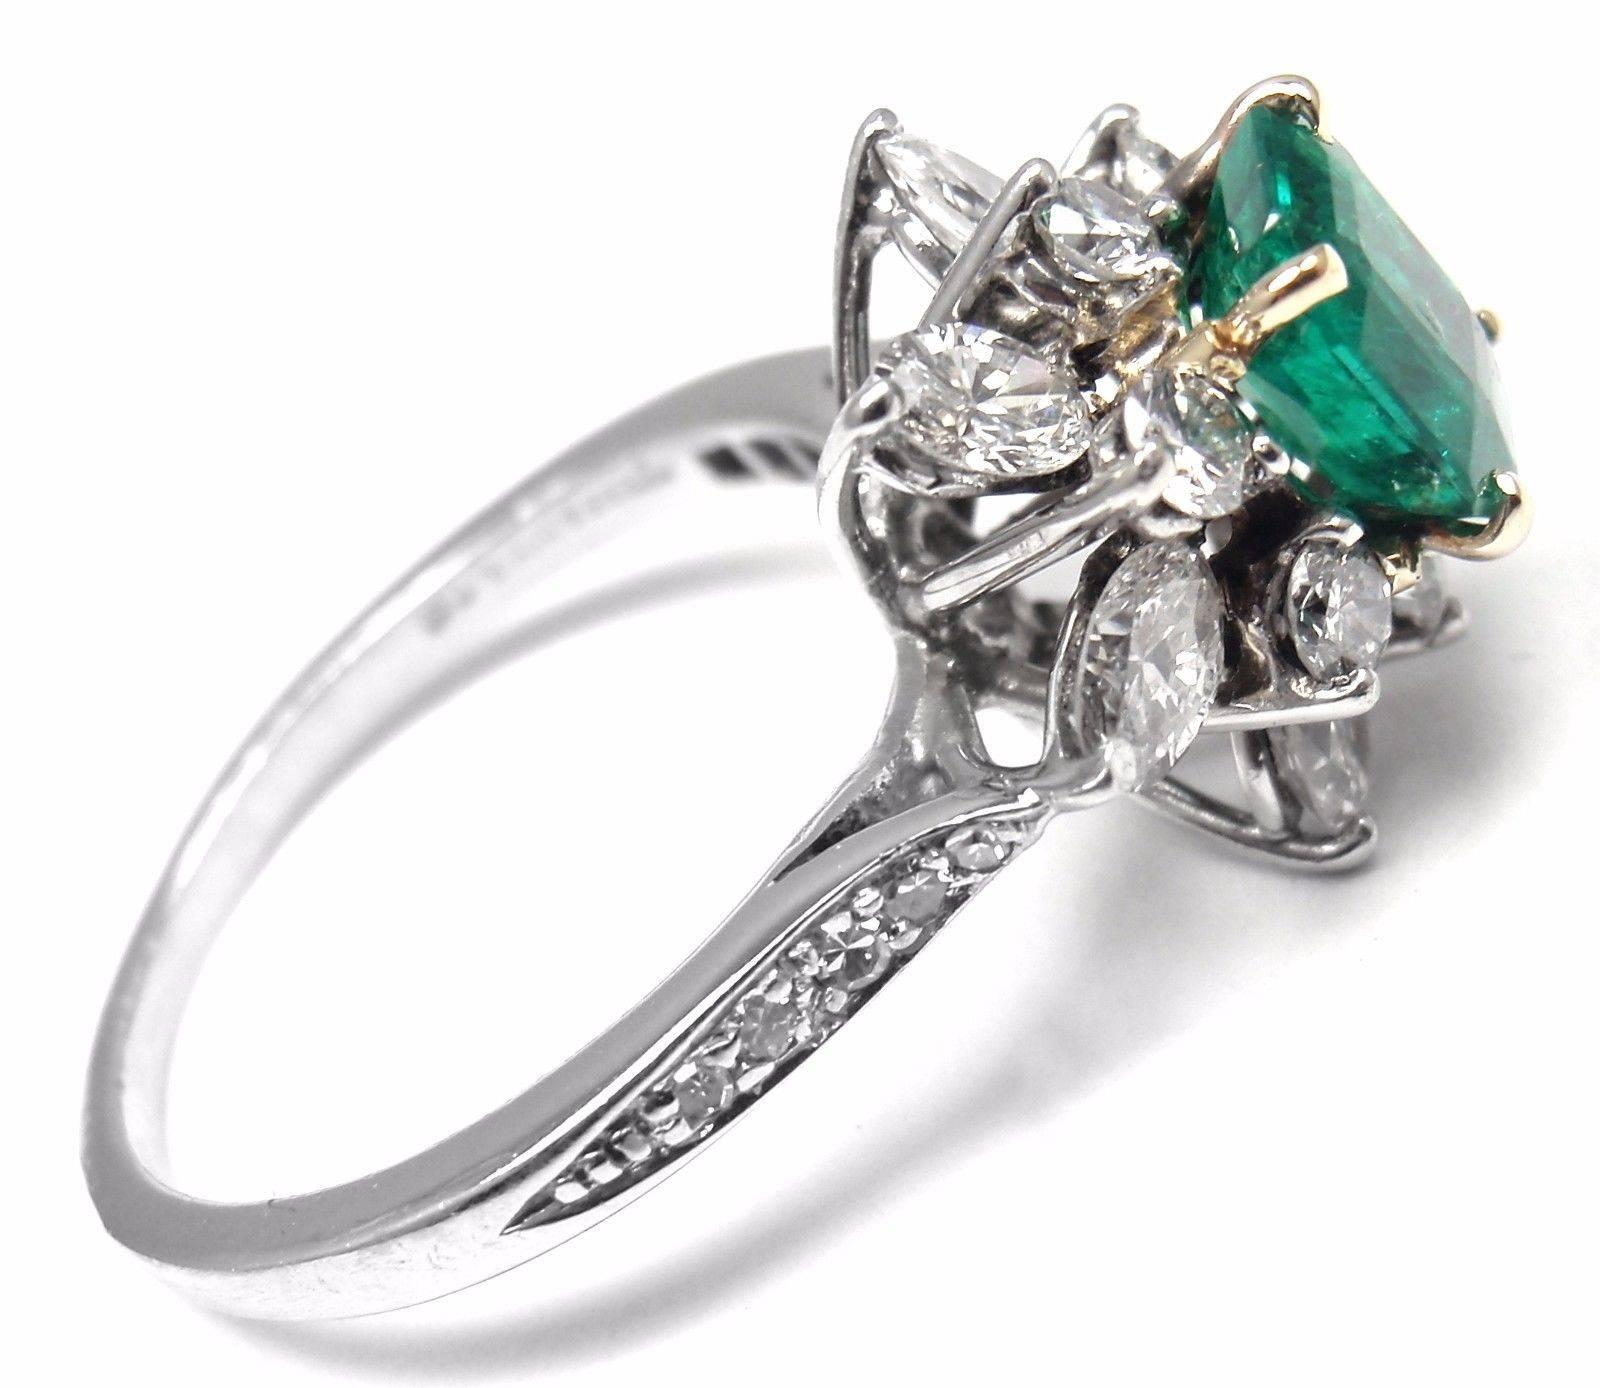 Irid Platinum Emerald Diamond Ring by Tiffany & Co. 
With 16 round shape diamonds and 6 marque cut diamonds VS1 clarity G color total weight approx. 1ct
1  Colombian emerald 6.64 x 5.50 x 3.22mm total weight is .82ct 
This ring comes with GIA